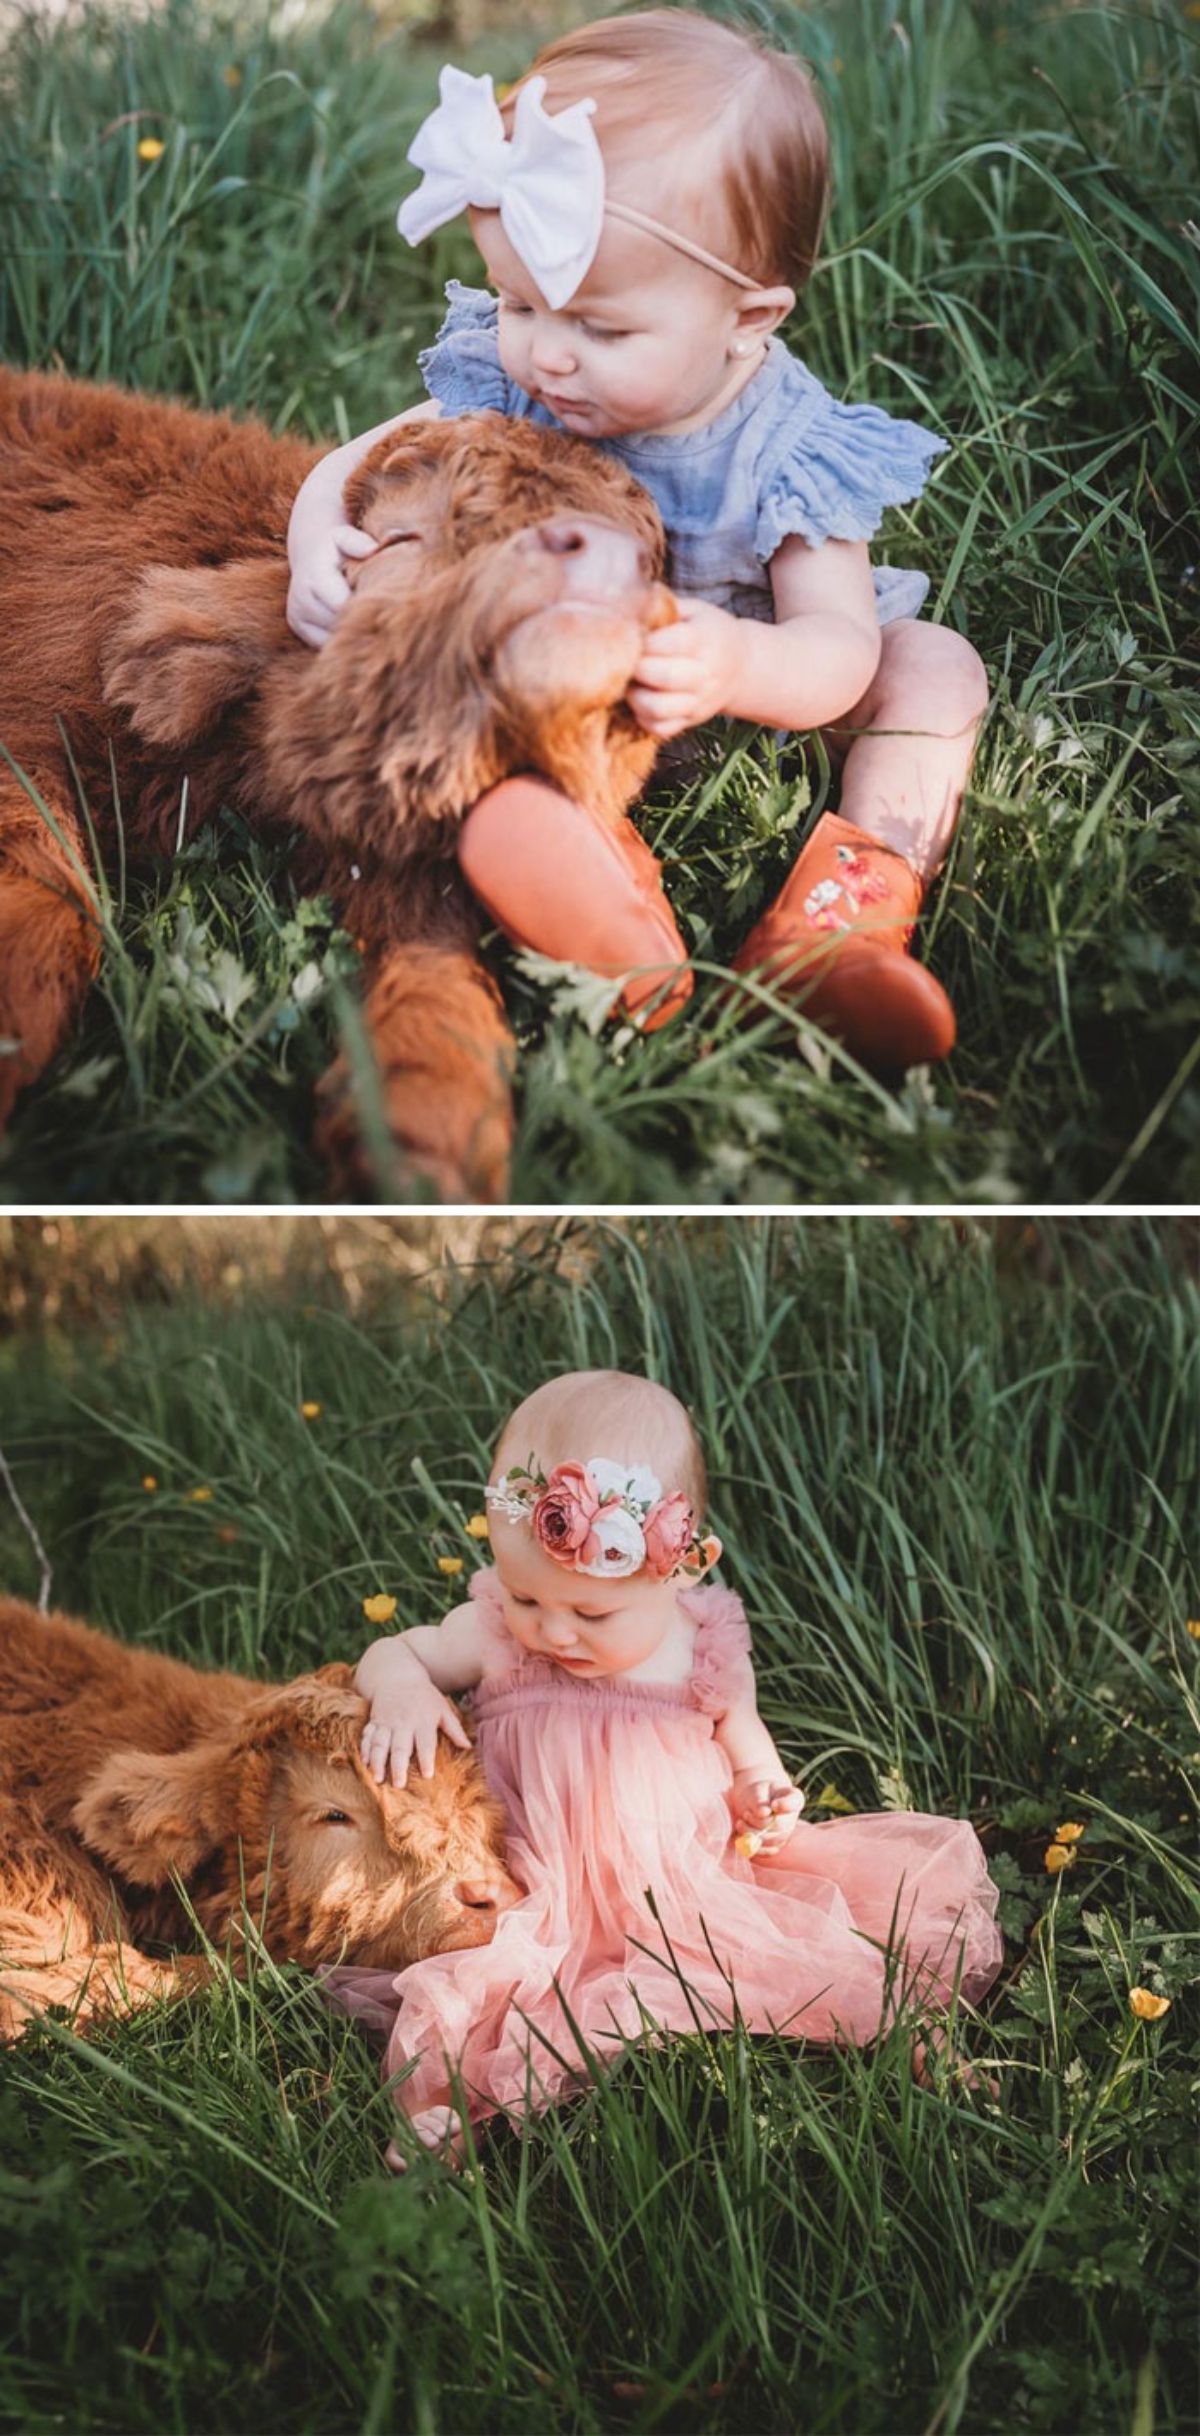 2 photos of a brown calf with a little girl sitting on grass